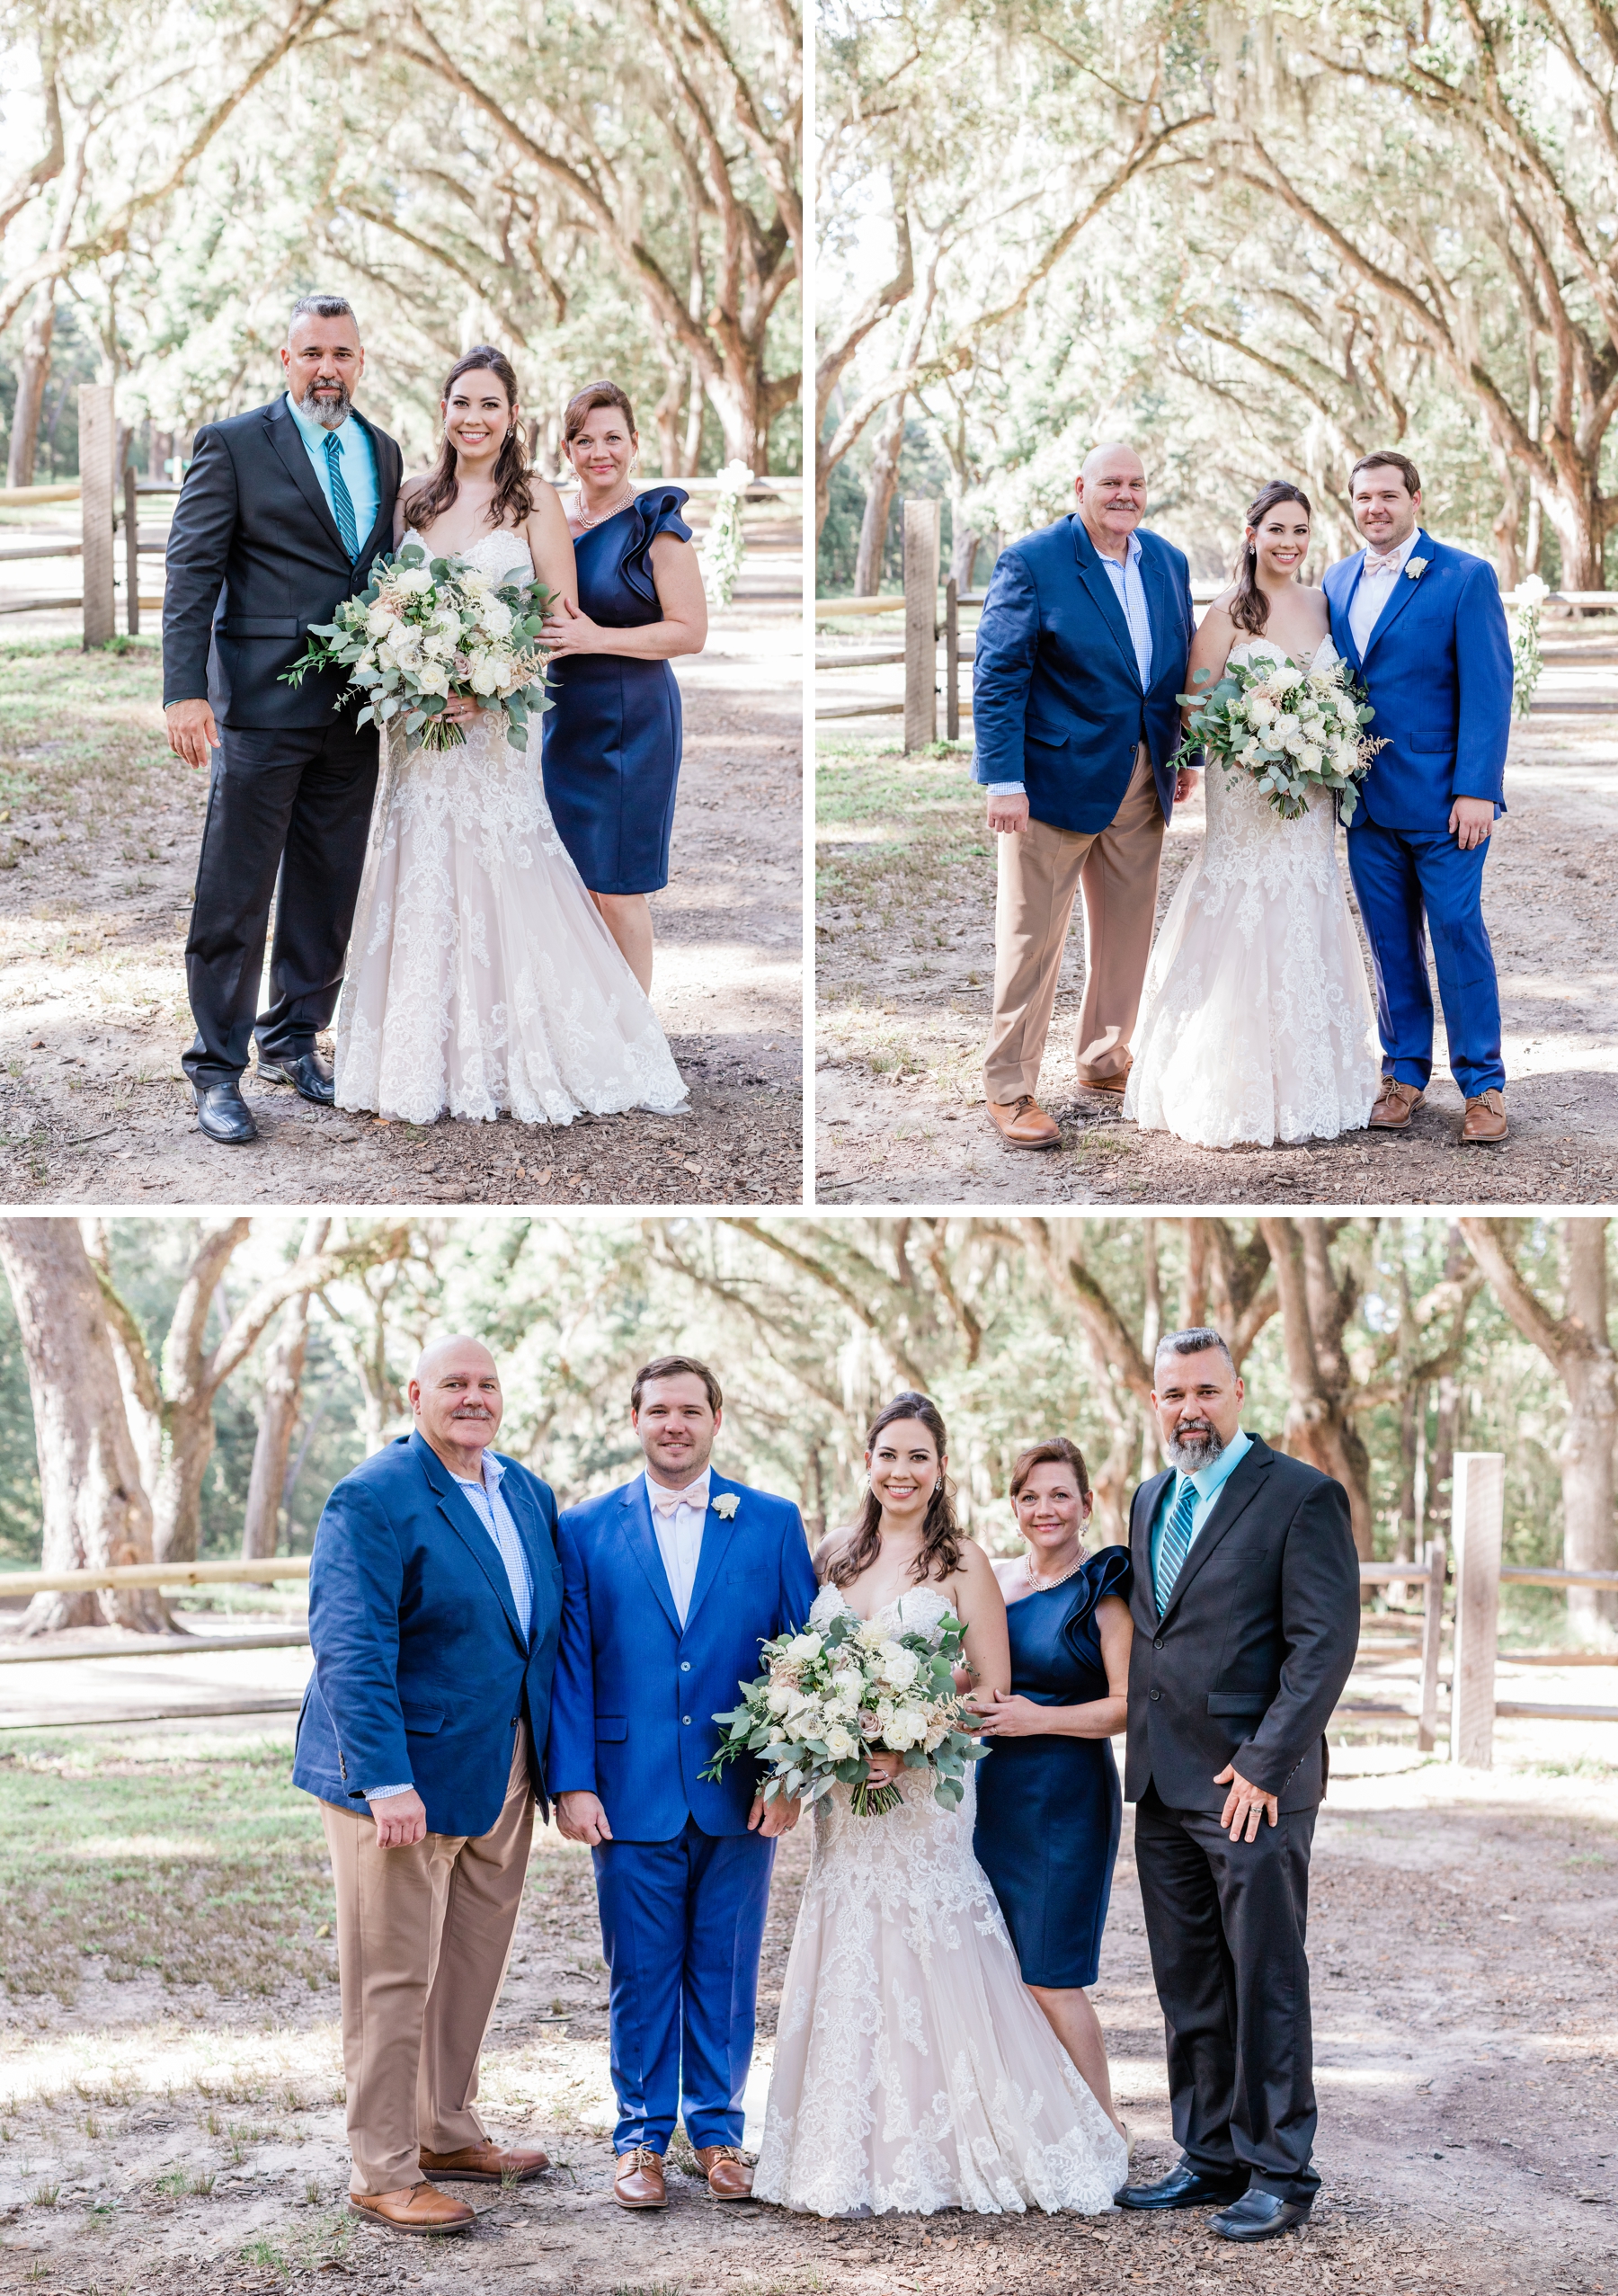 Breanna and Taylor’s Wormsloe Elopement by The Savannah Elopement Package